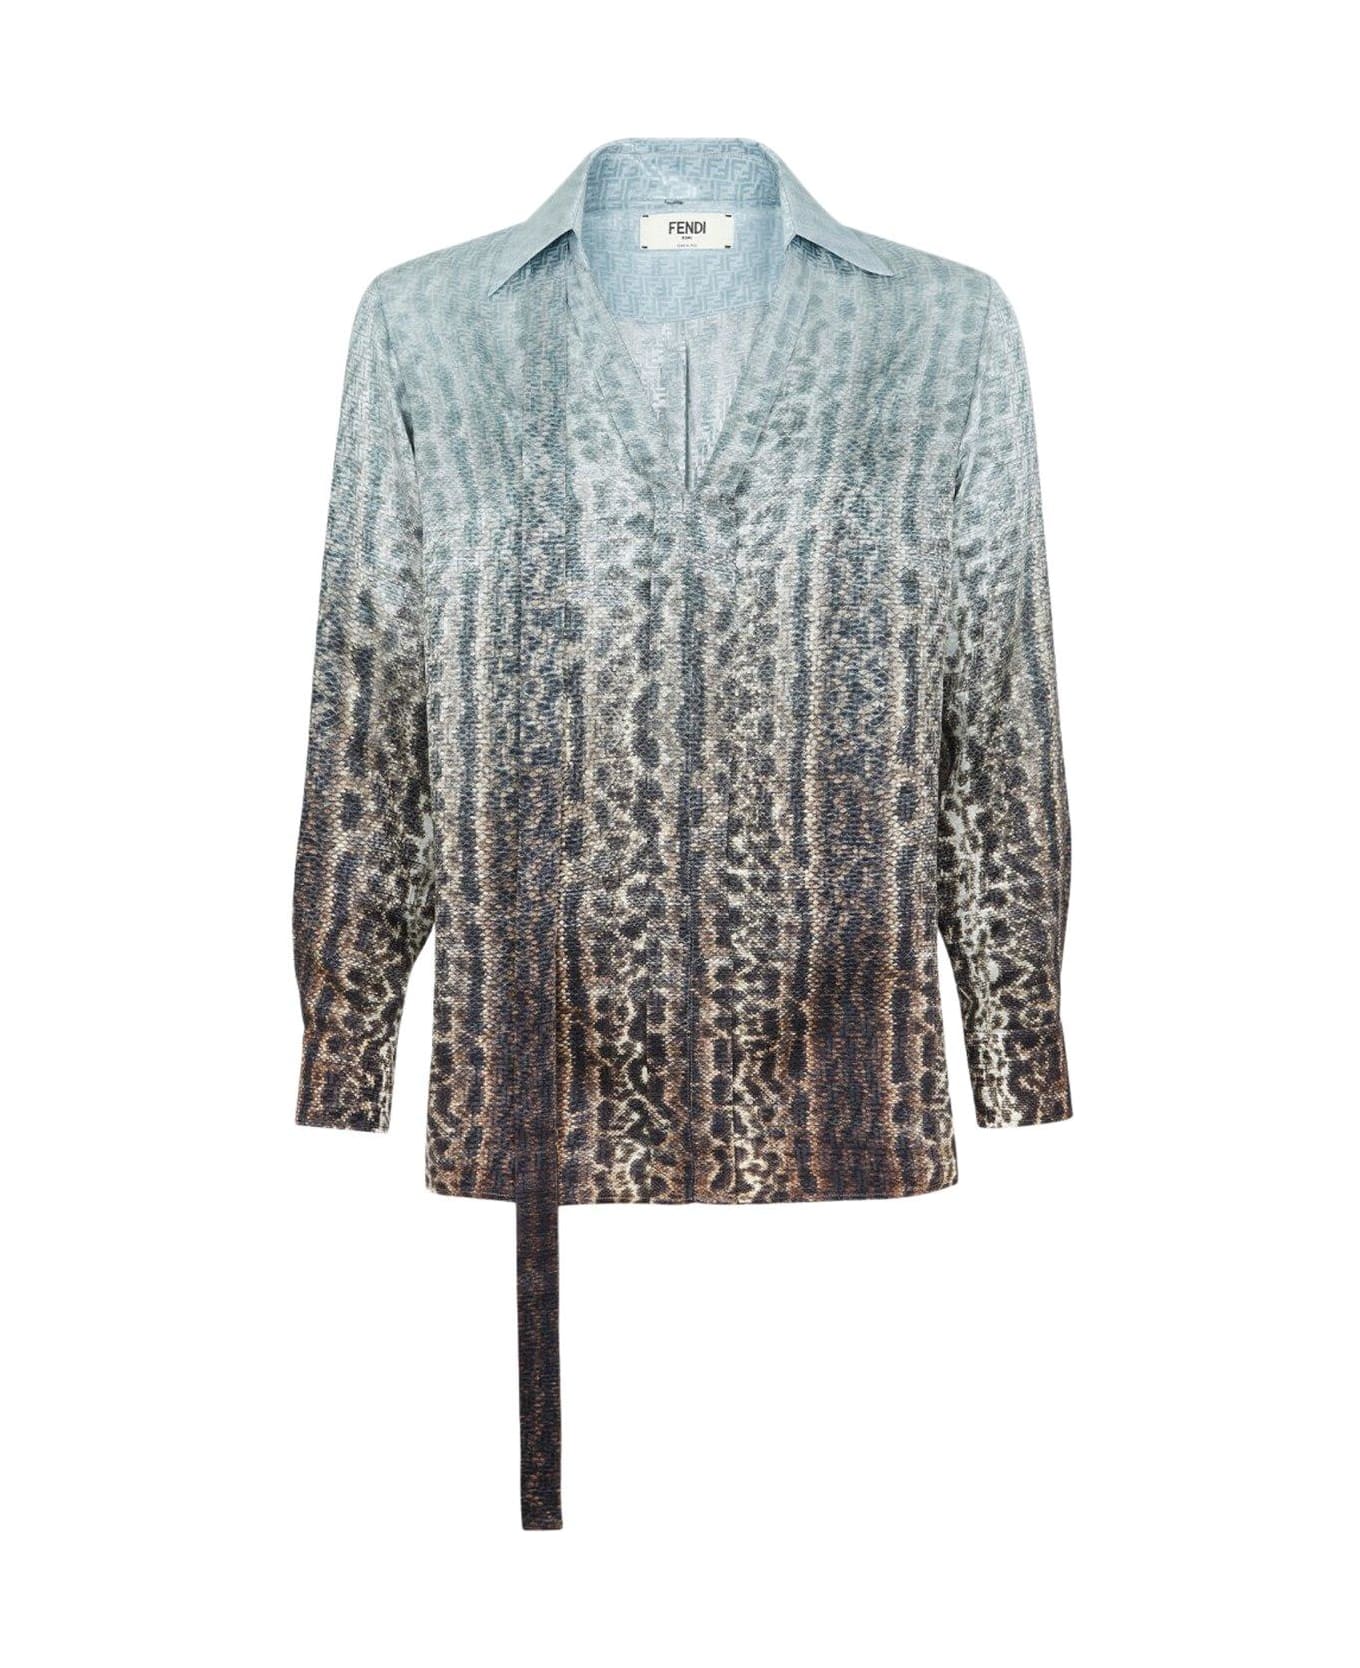 Fendi All-over Printed Sleeved Blouse - Clear Blue ブラウス